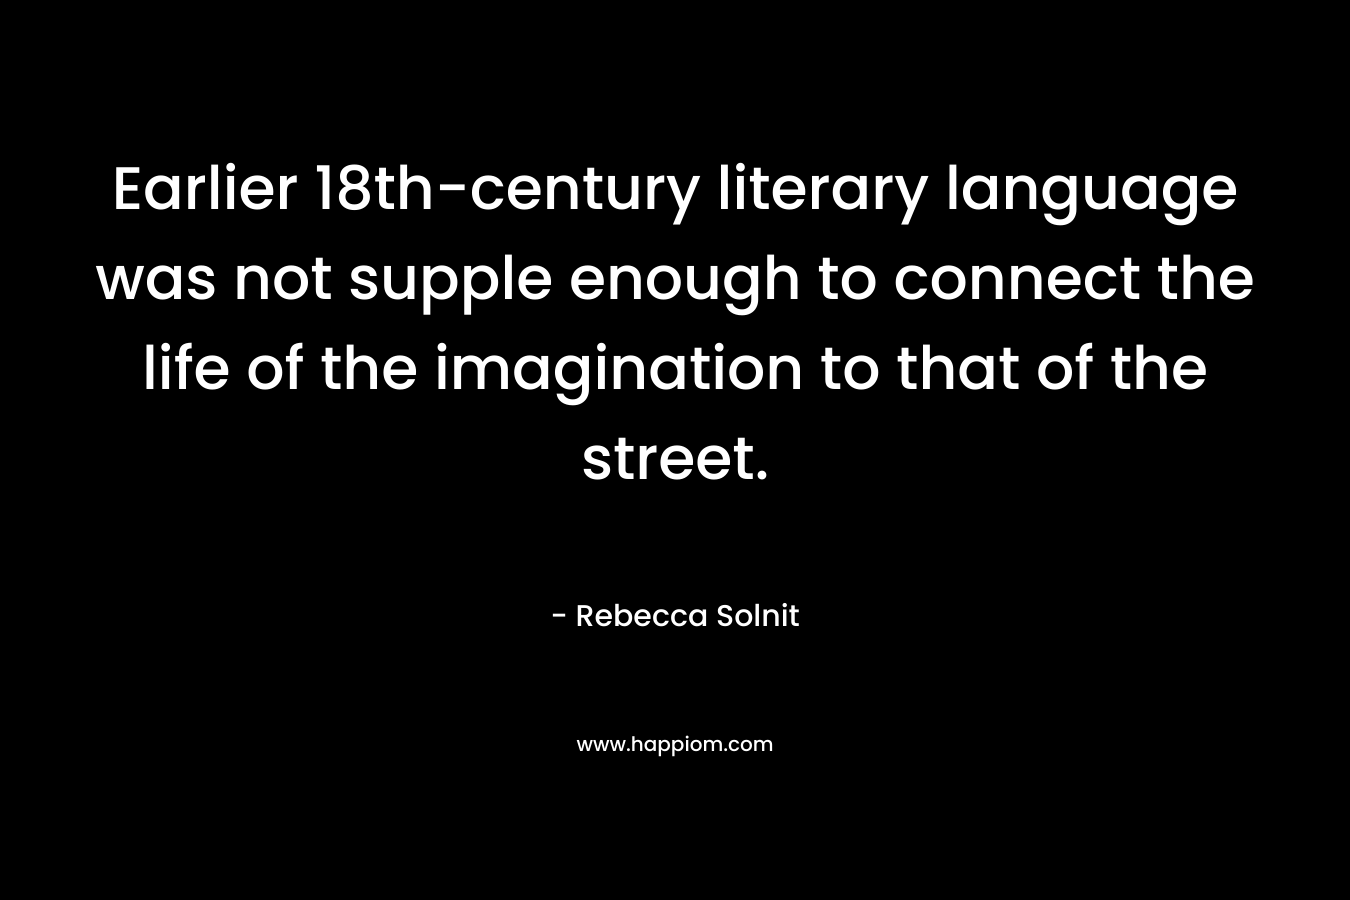 Earlier 18th-century literary language was not supple enough to connect the life of the imagination to that of the street.